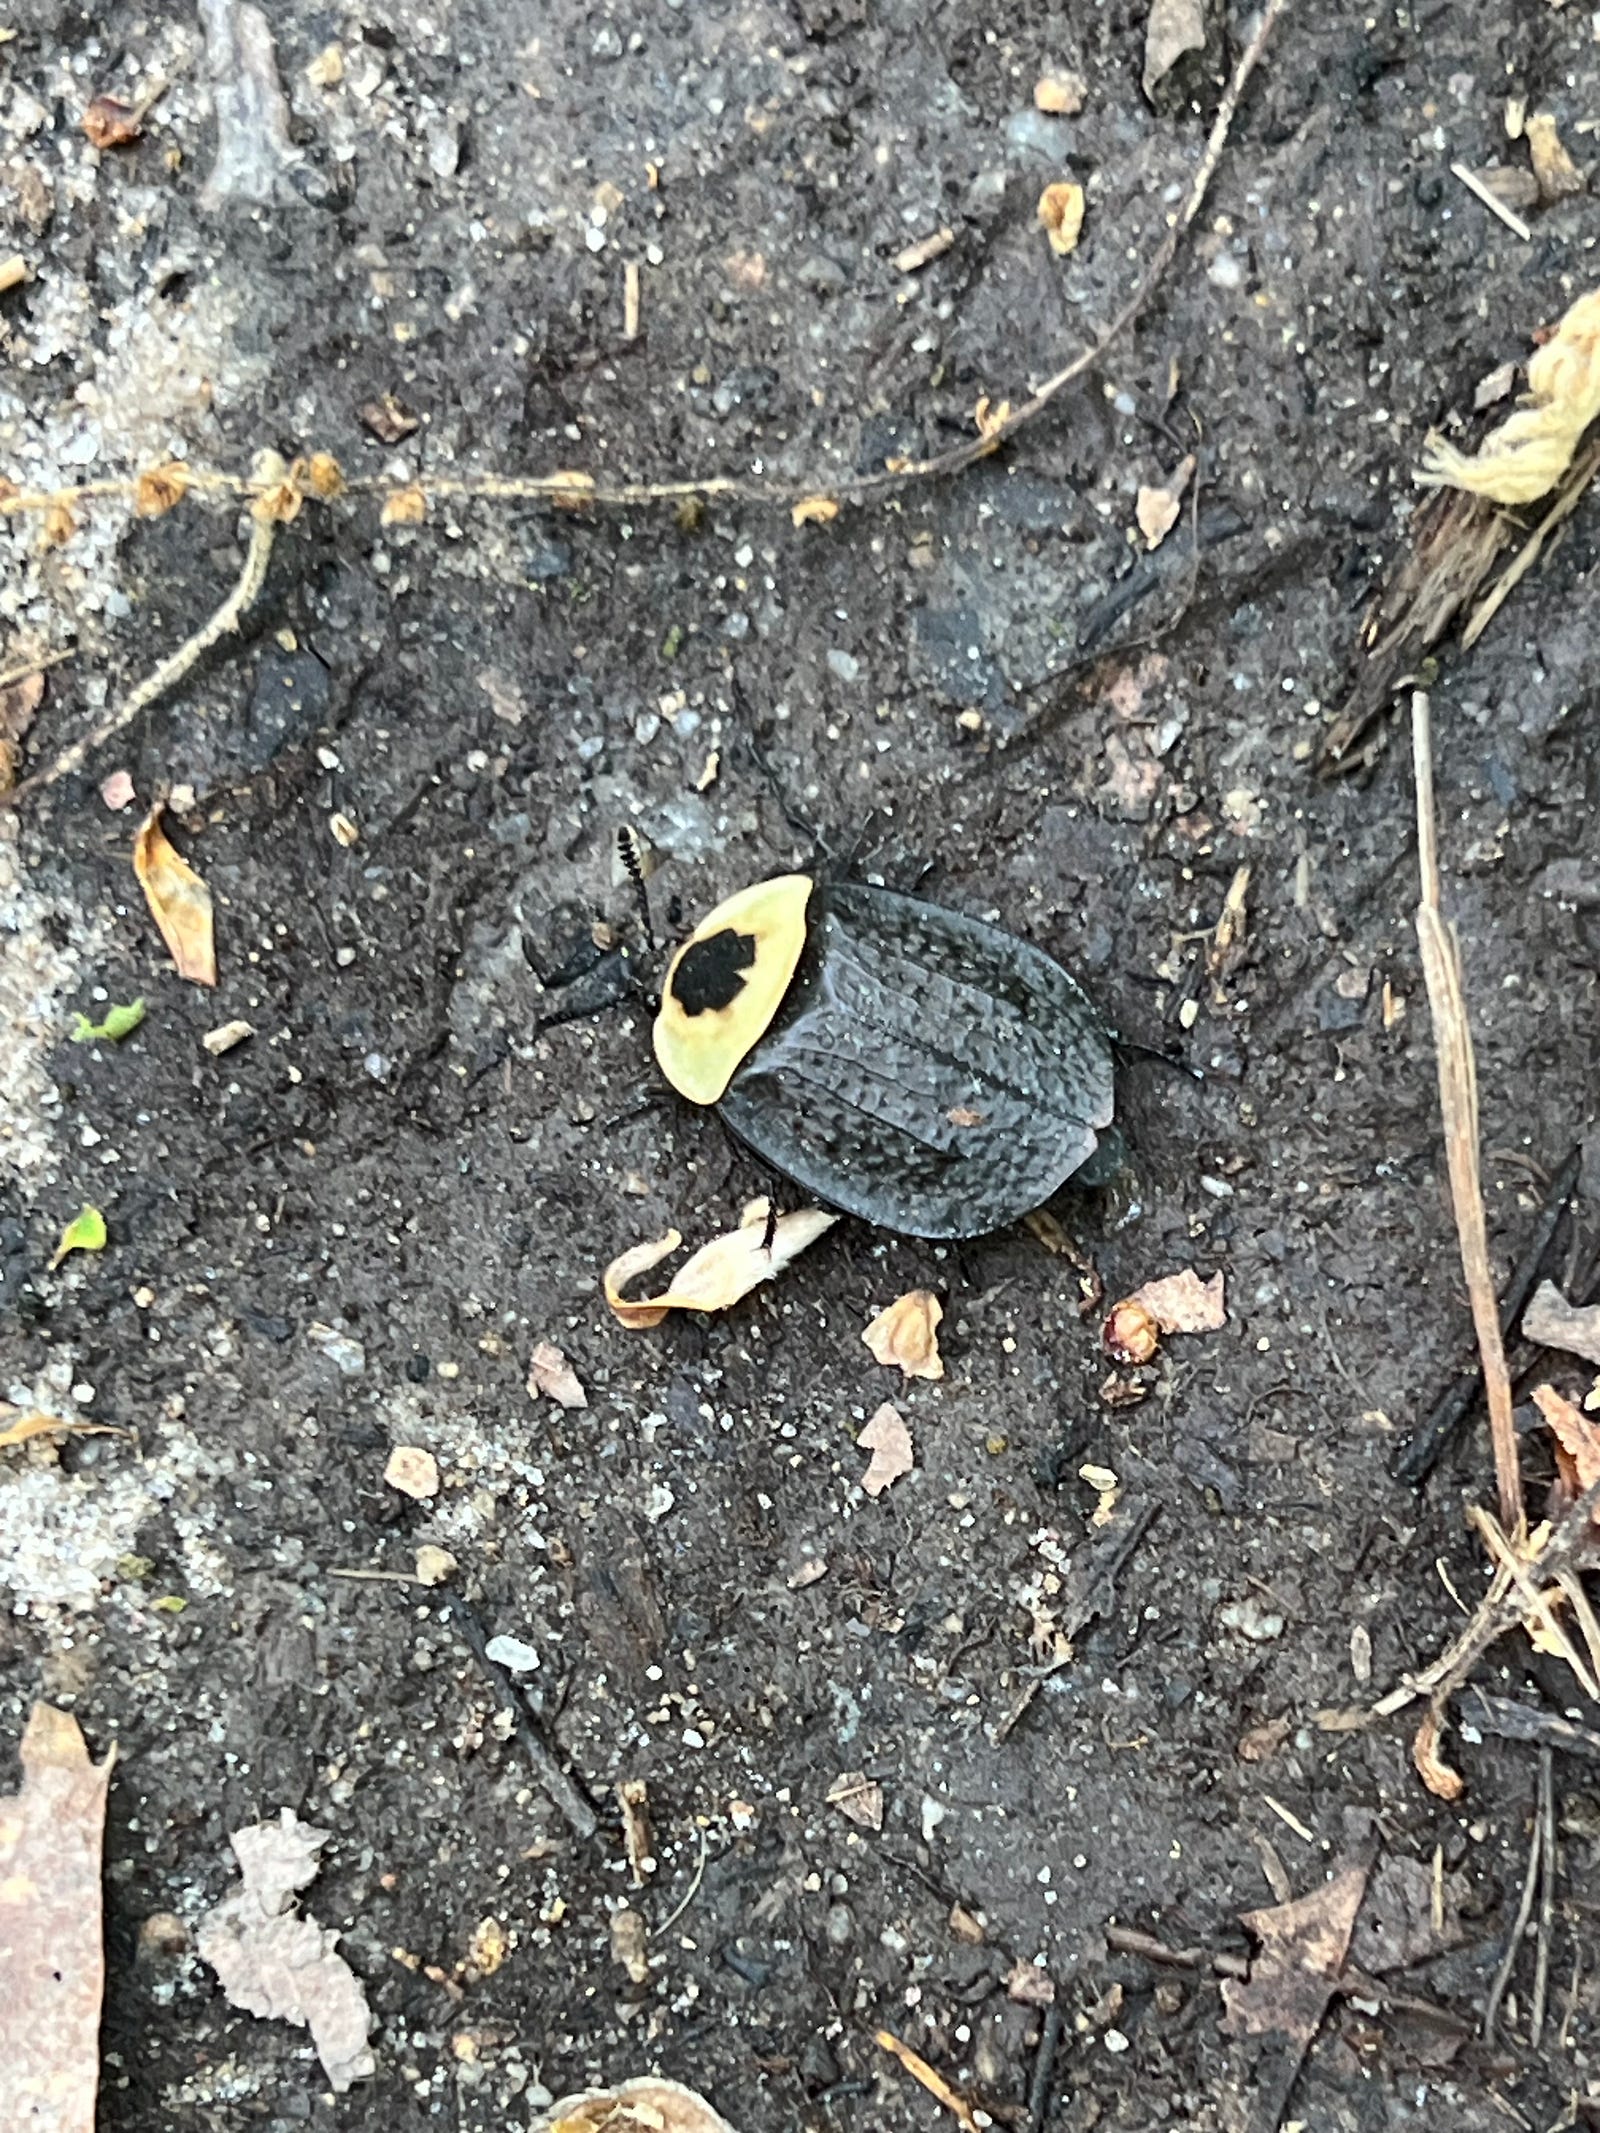 Photo of an American Carrion Beetle (Necrophila americana) in the Merret Family Forest, in Mystic, CT. The bettle’s body is black with a yellow head that features a black dot in the center.